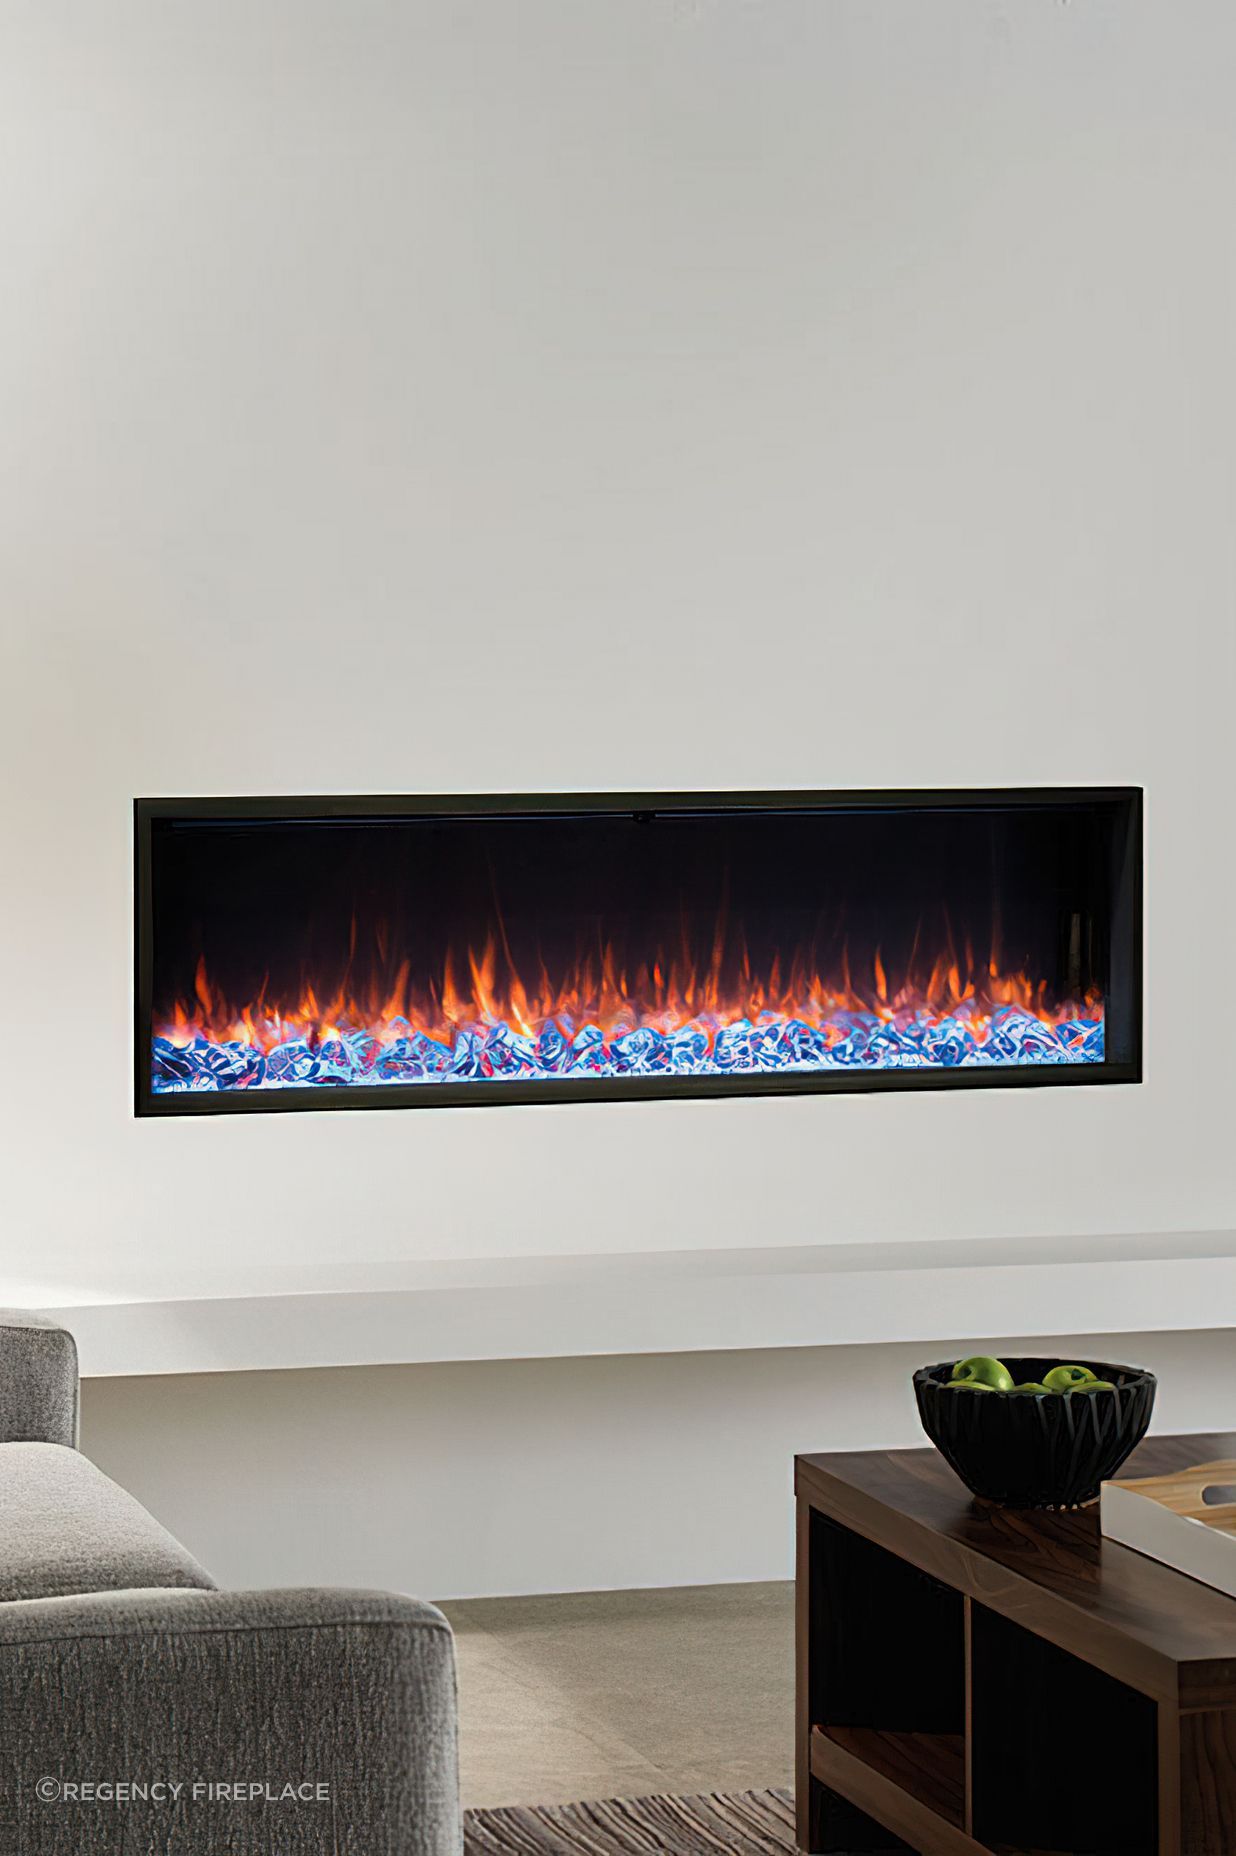 The Gazco eReflex 135R Electric Fireplace has different flame visuals available.